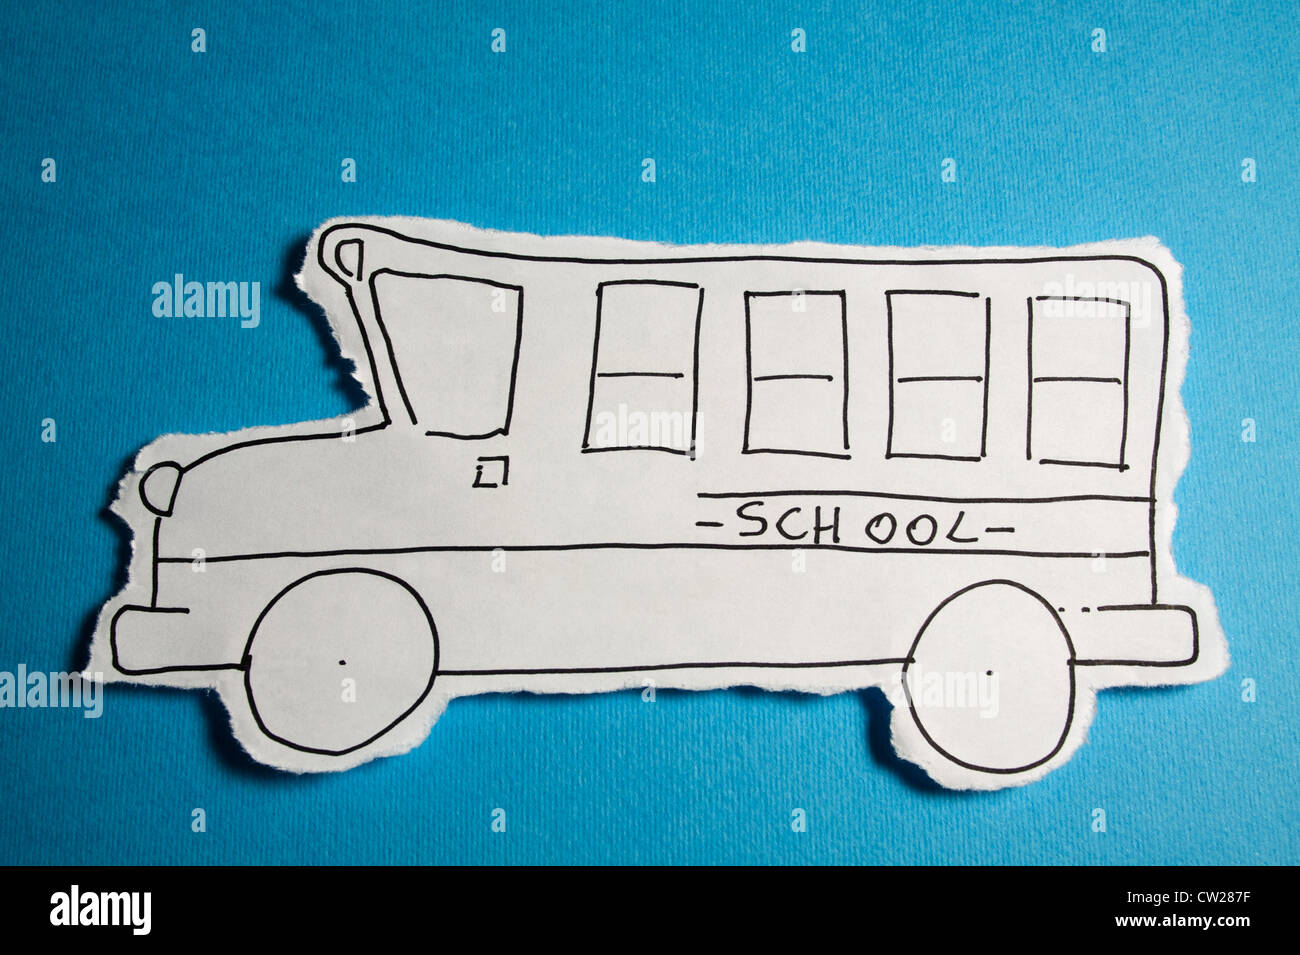 CHILD MADE SKETCH, School bus draw black on white on a Cyan blue background Stock Photo